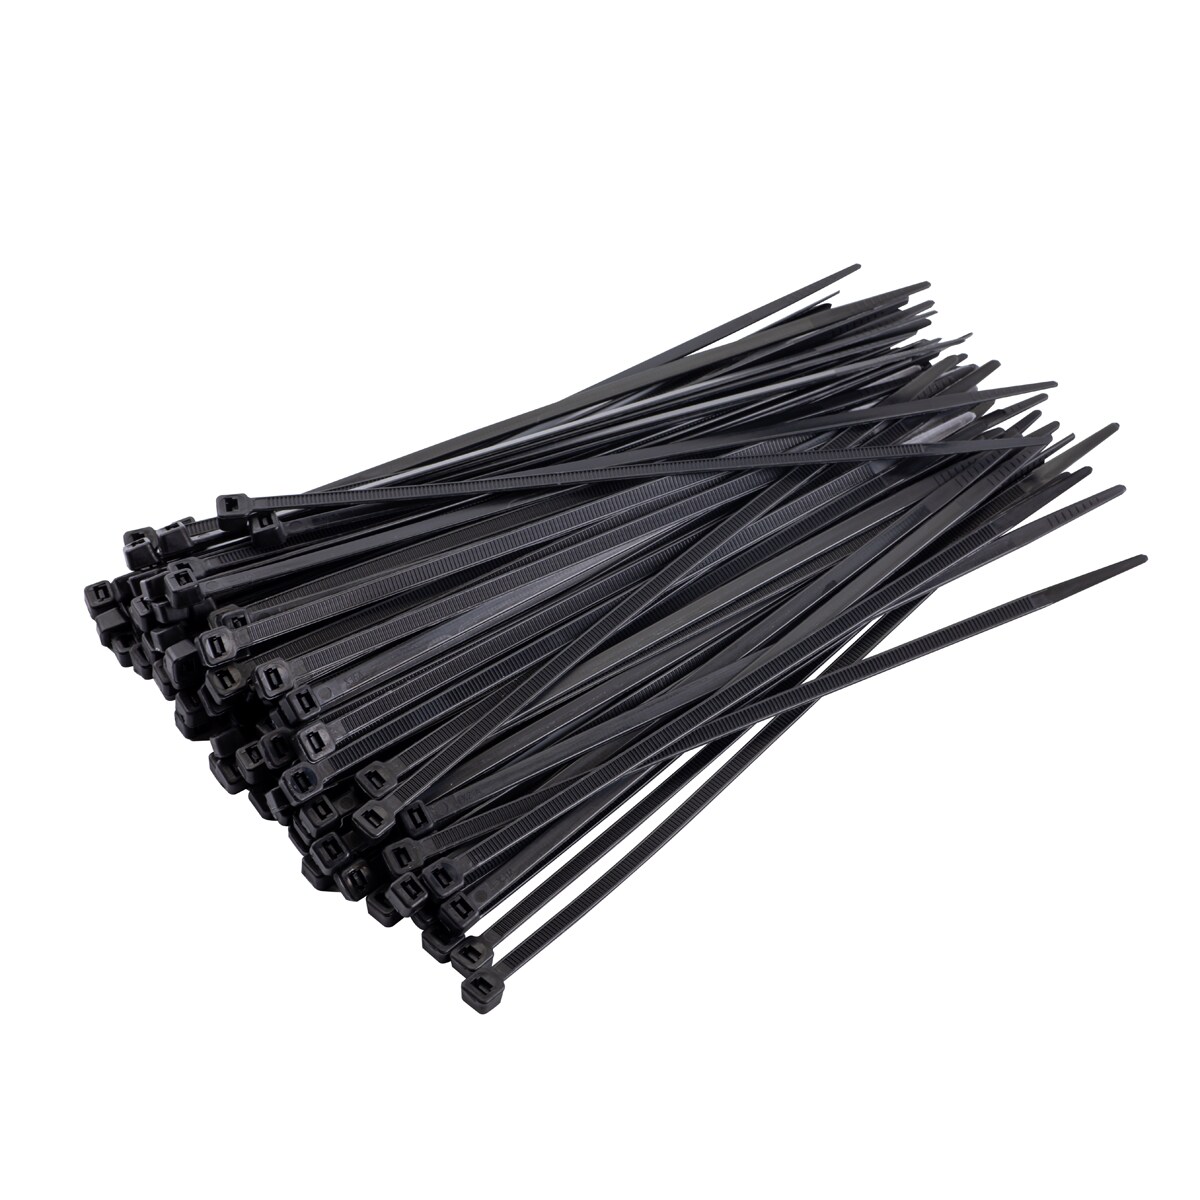 Many Pack Of 250mm x 4.8mm Black Cable Ties Zip Tie Wrap Nylon Zip Cable Ties 